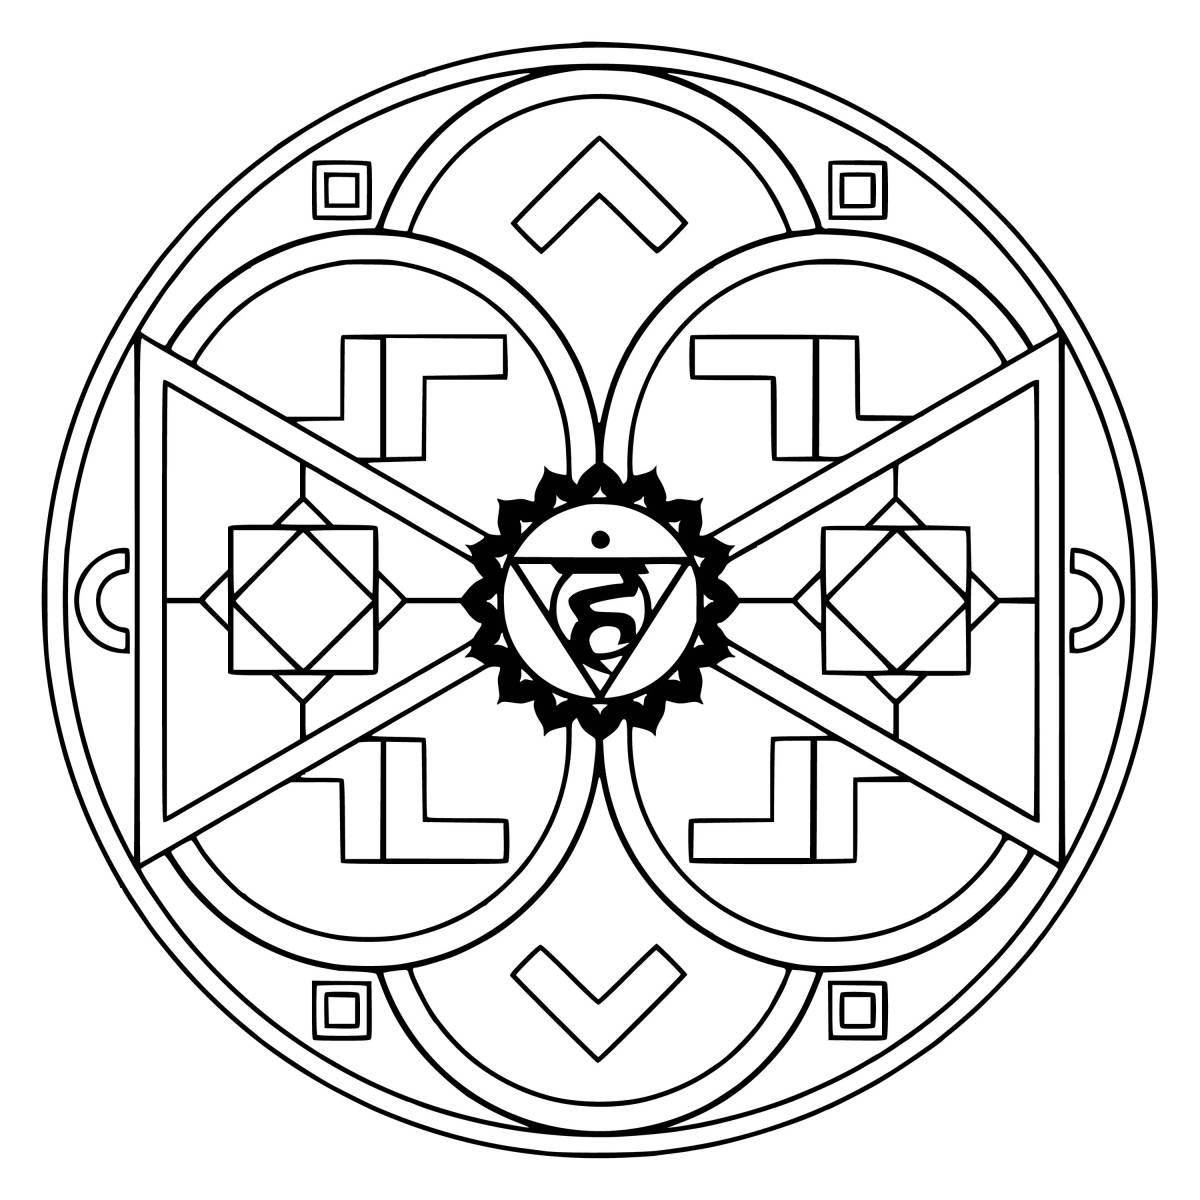 Awesome chakra coloring pages